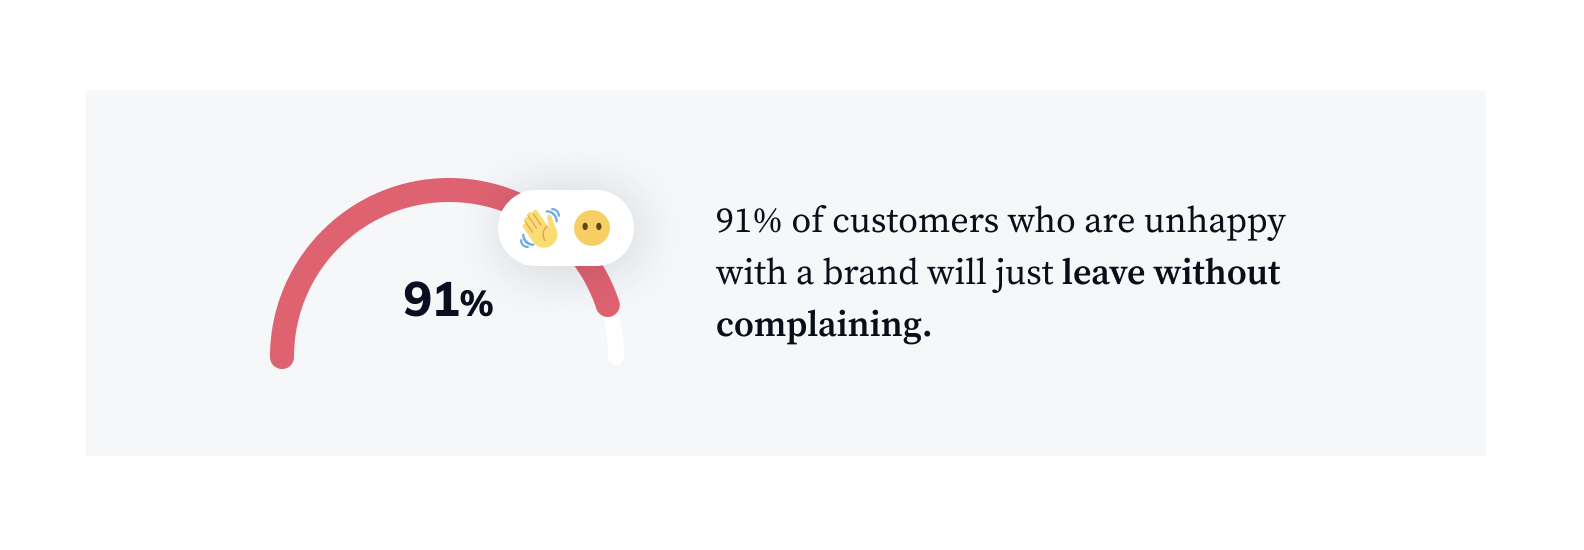 91% of customers who are unhappy with a brand will just leave without complaining photo